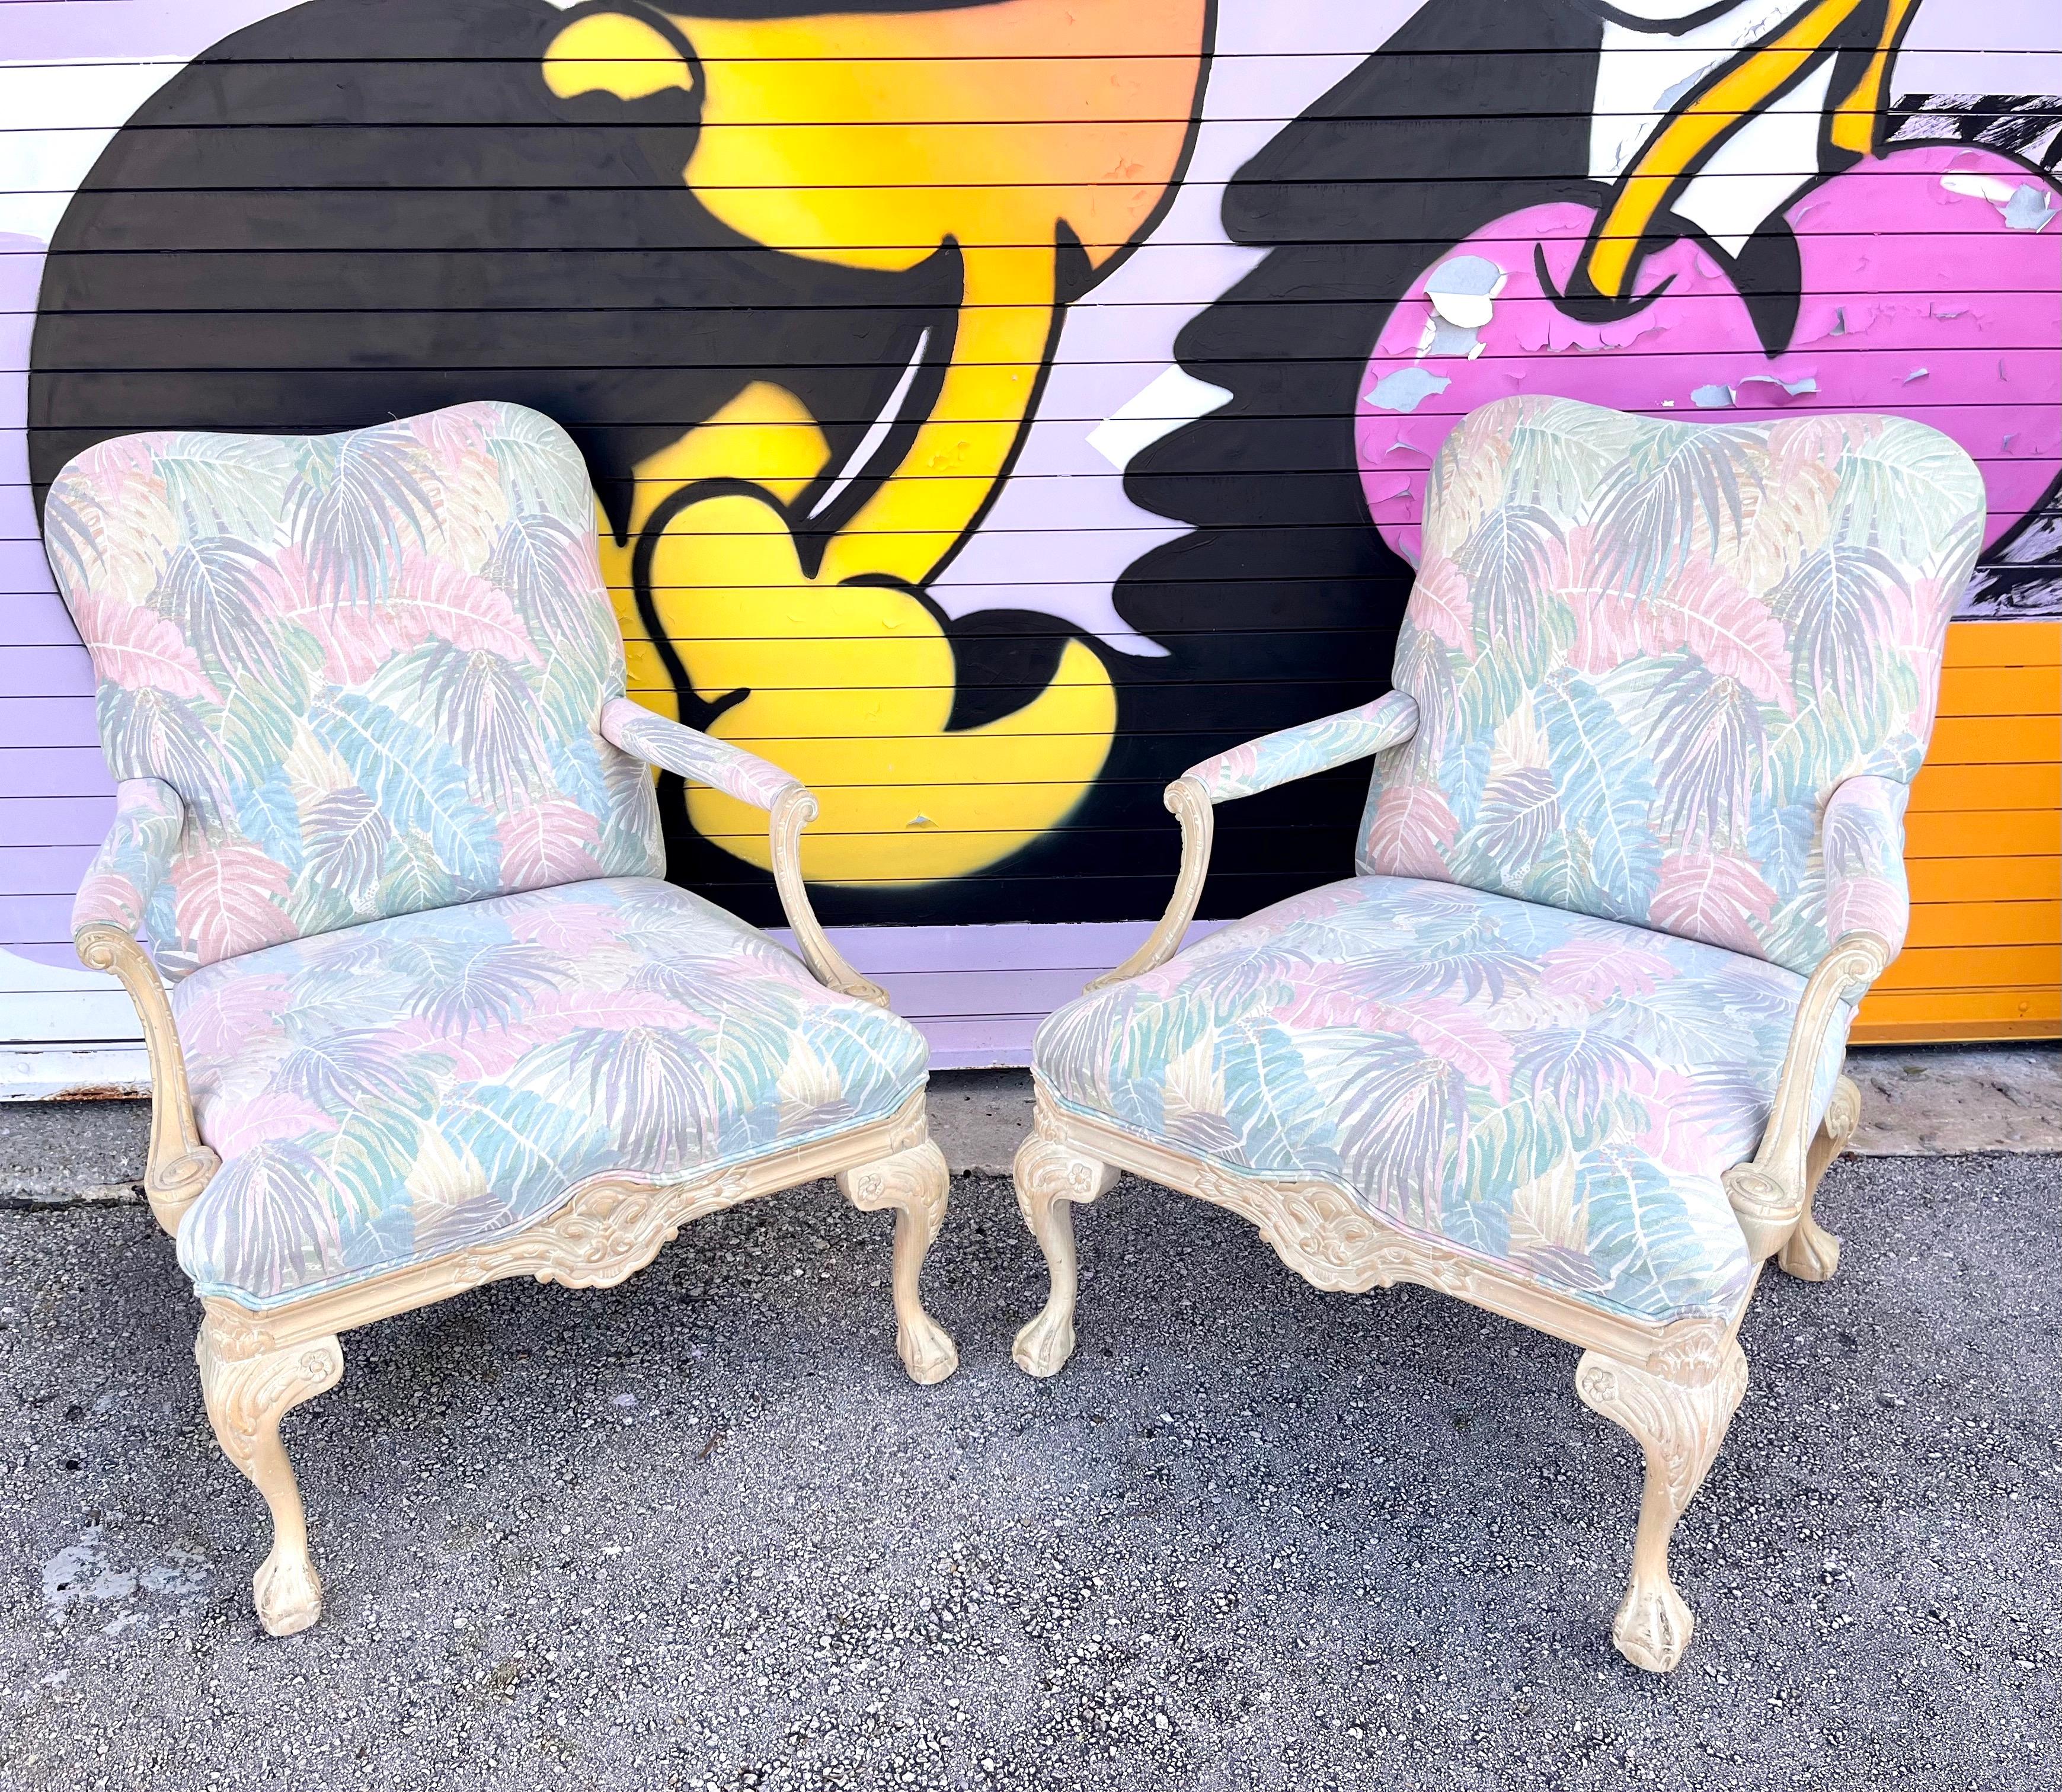 A Pair of Coastal Style Bergere Armchairs by Sherrill Furniture. Circa 1980s  
Feature a Classic Style French Bergere Chair Light Tan Carved Wood Frame, Upholstered with a Coastal Style Botanical Print in Muted Pastel Colors. 
In excellent near mint